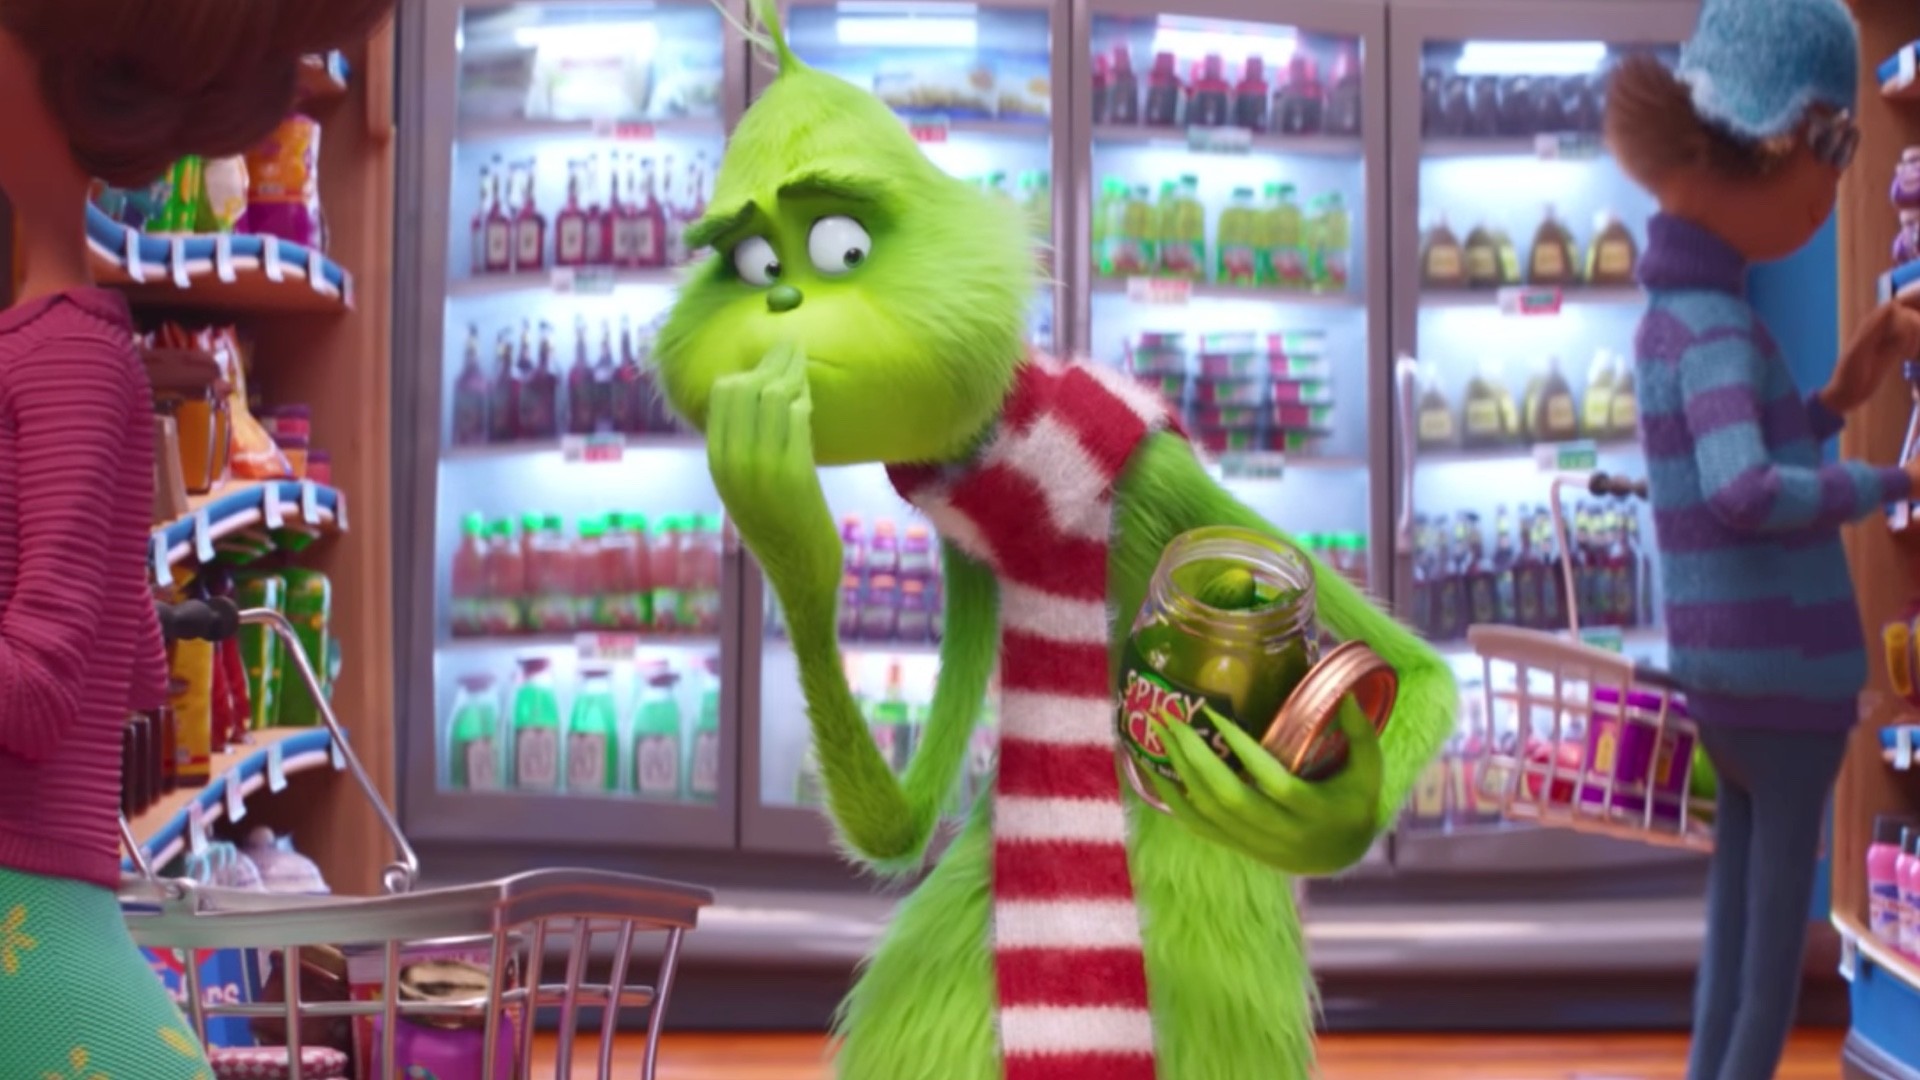 1920x1080 'Dr. Seuss' The Grinch' makes off with $66M at box office. '